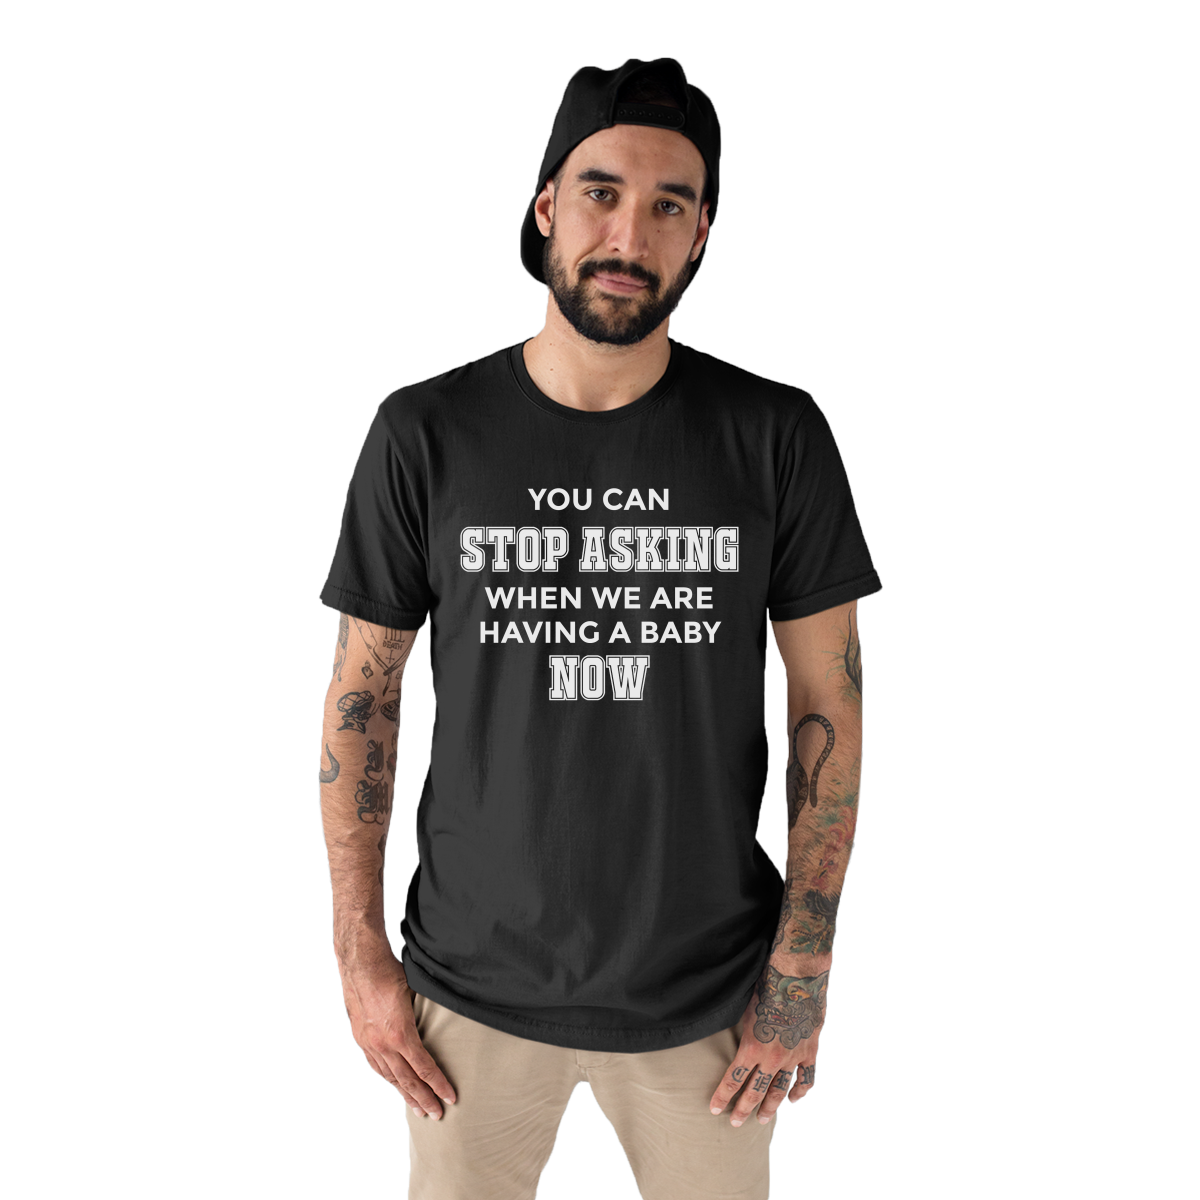 You can stop asking when we are having baby NOW Men's T-shirt | Black